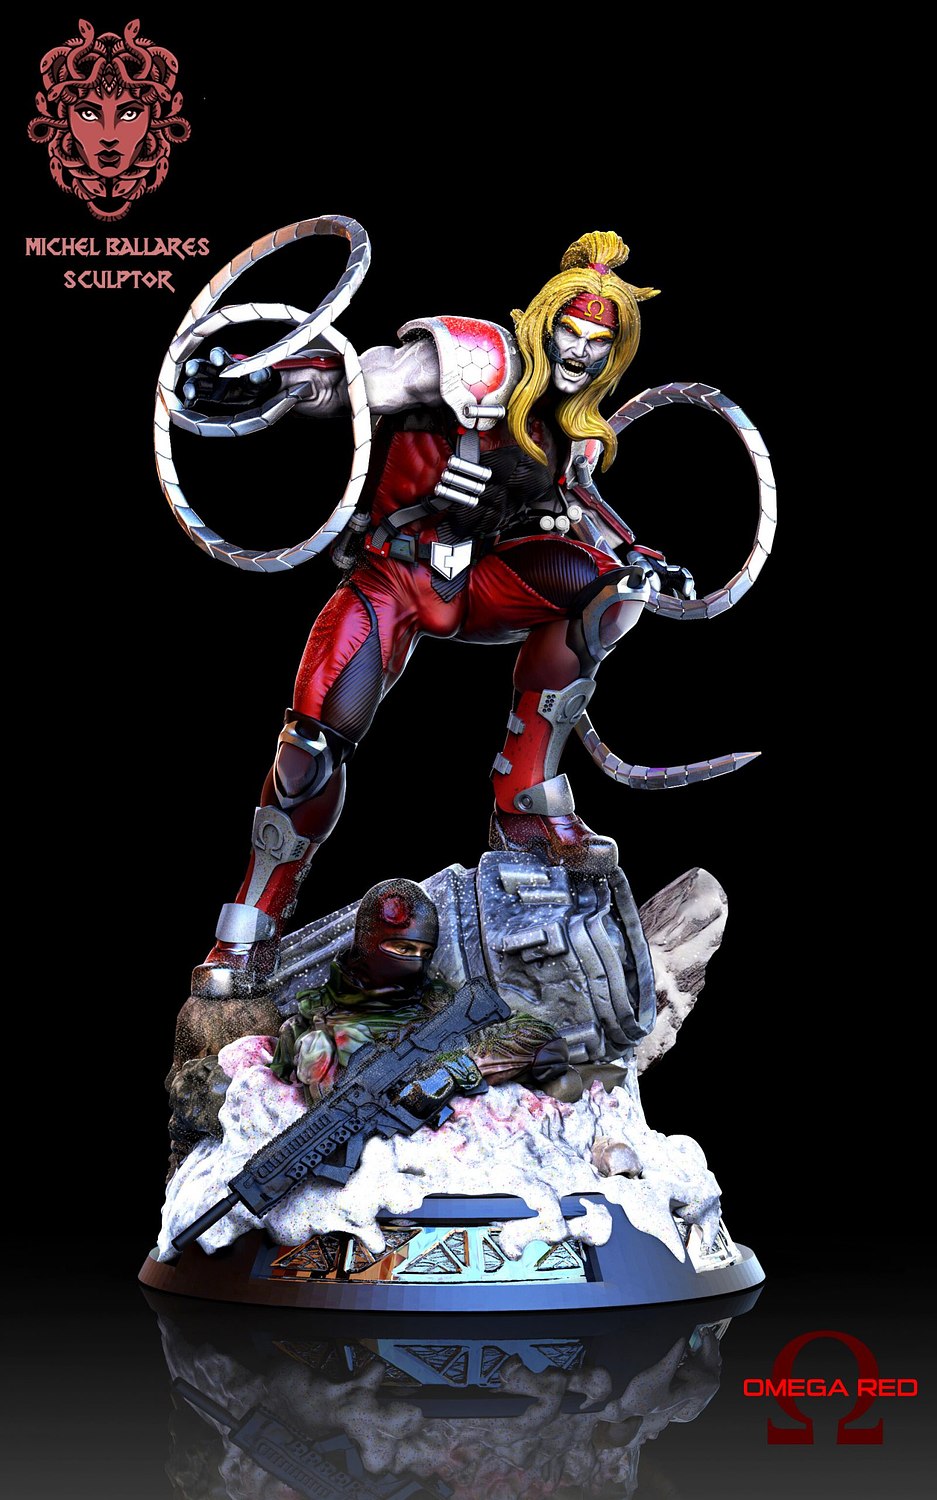 Omega Red from Marvel